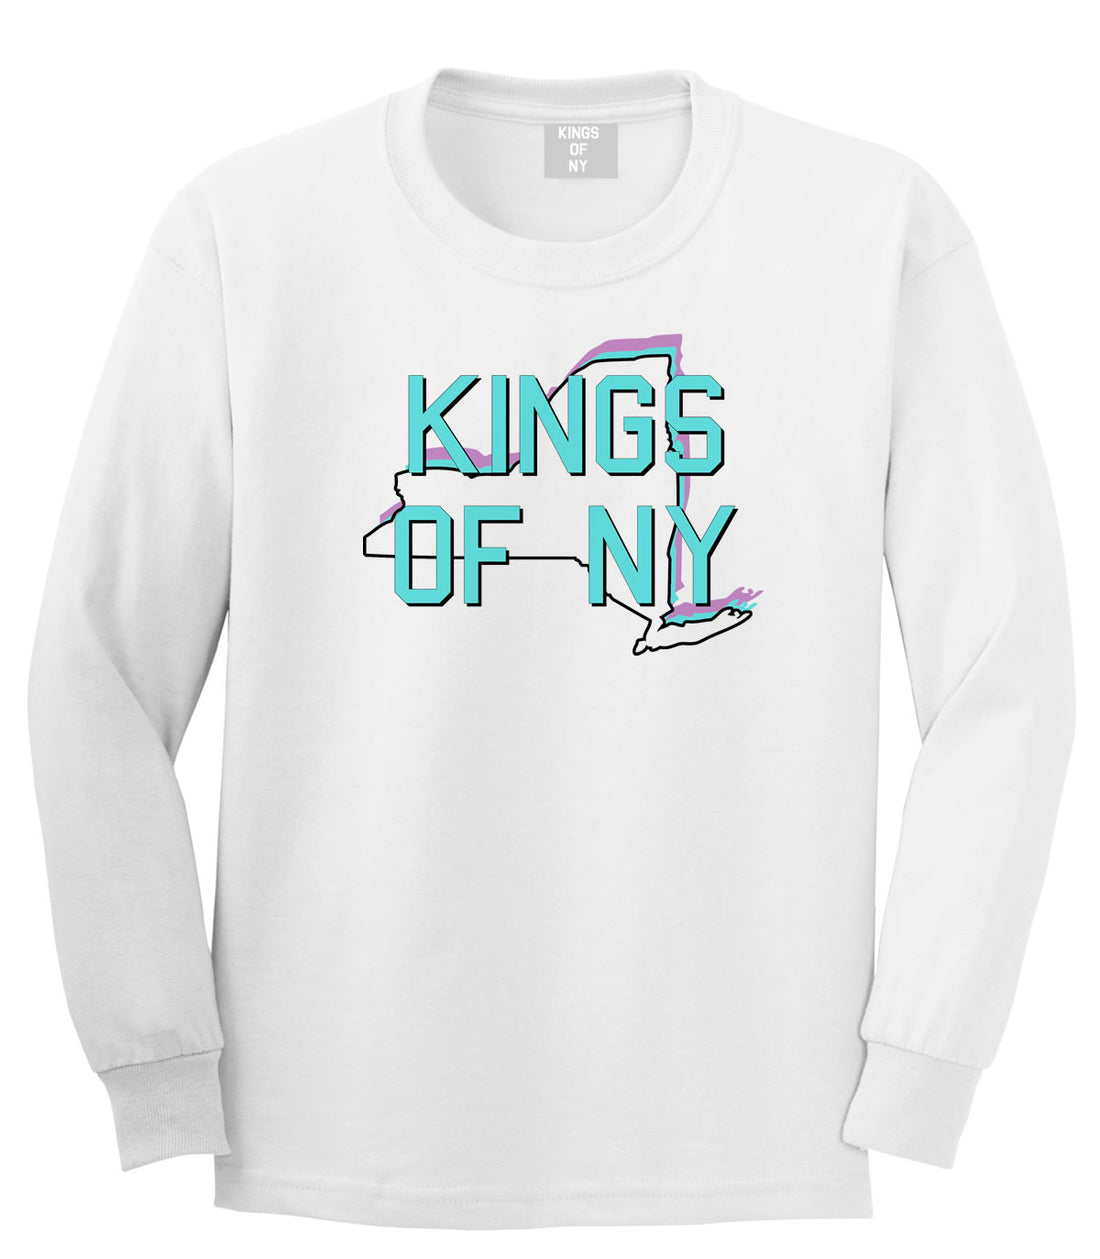 New York State Outline Long Sleeve T-Shirt in White by Kings Of NY